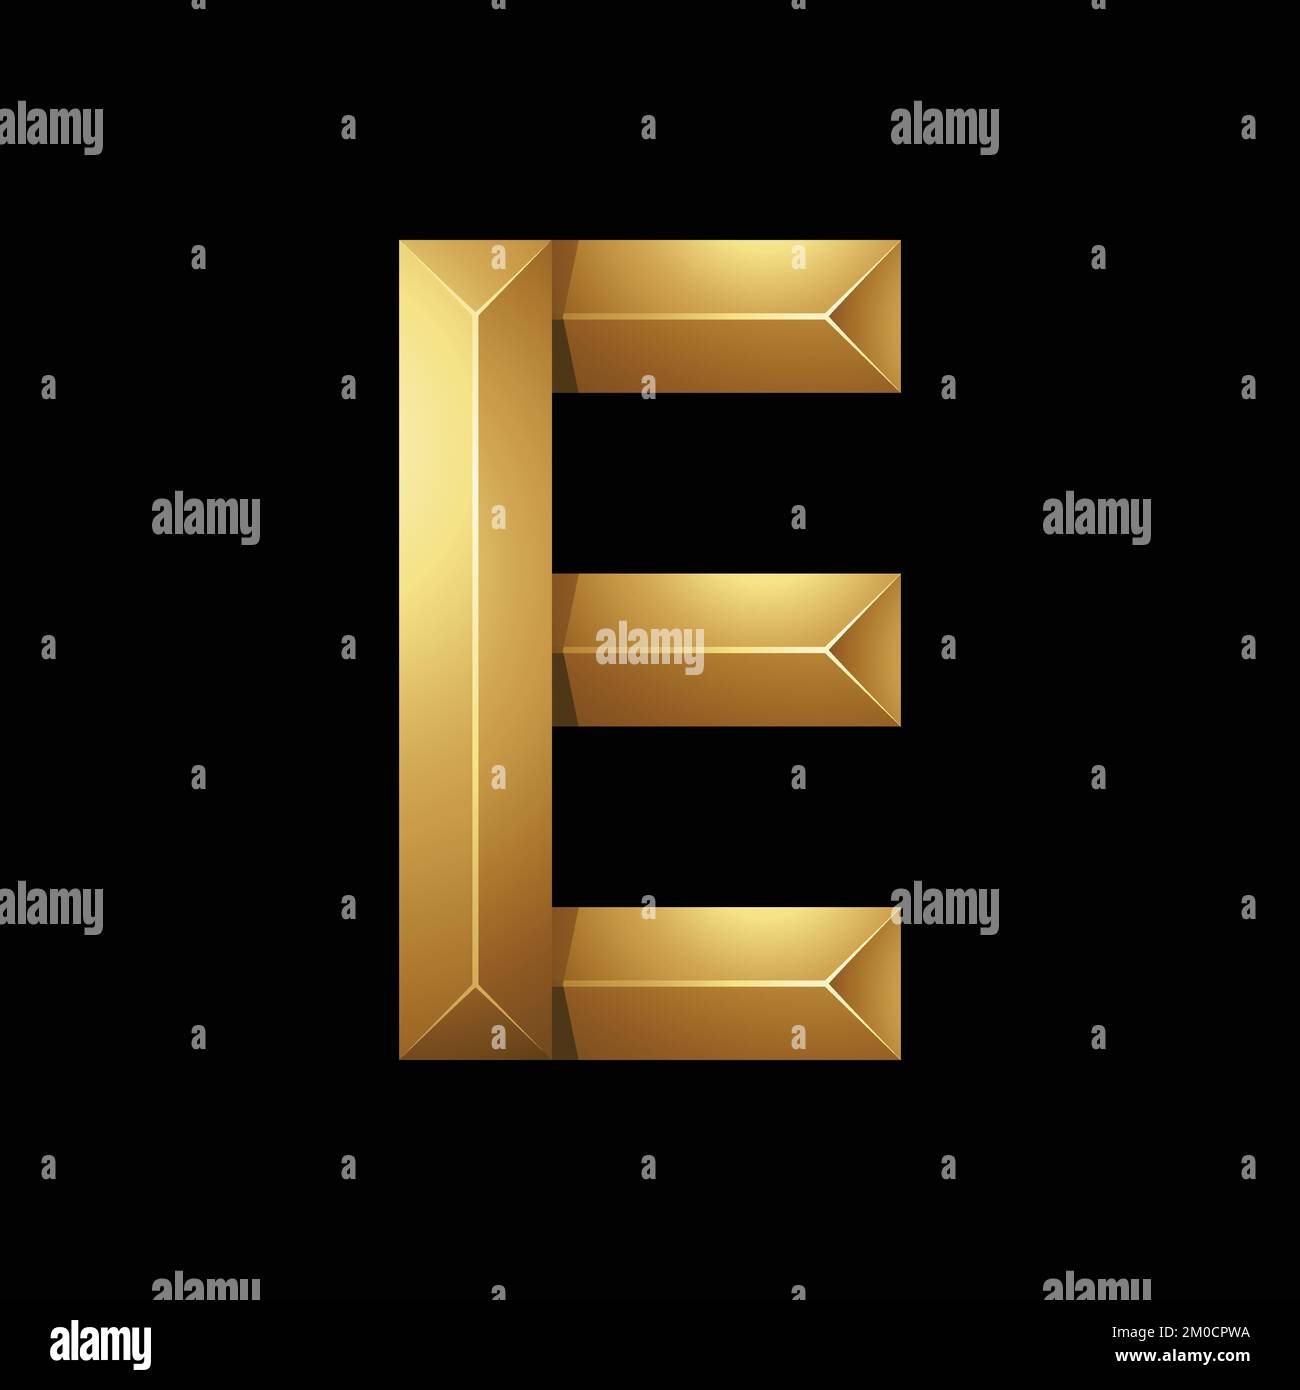 Golden Letter E Made of Pyramidical Rectangles on a Black Background Stock Vector